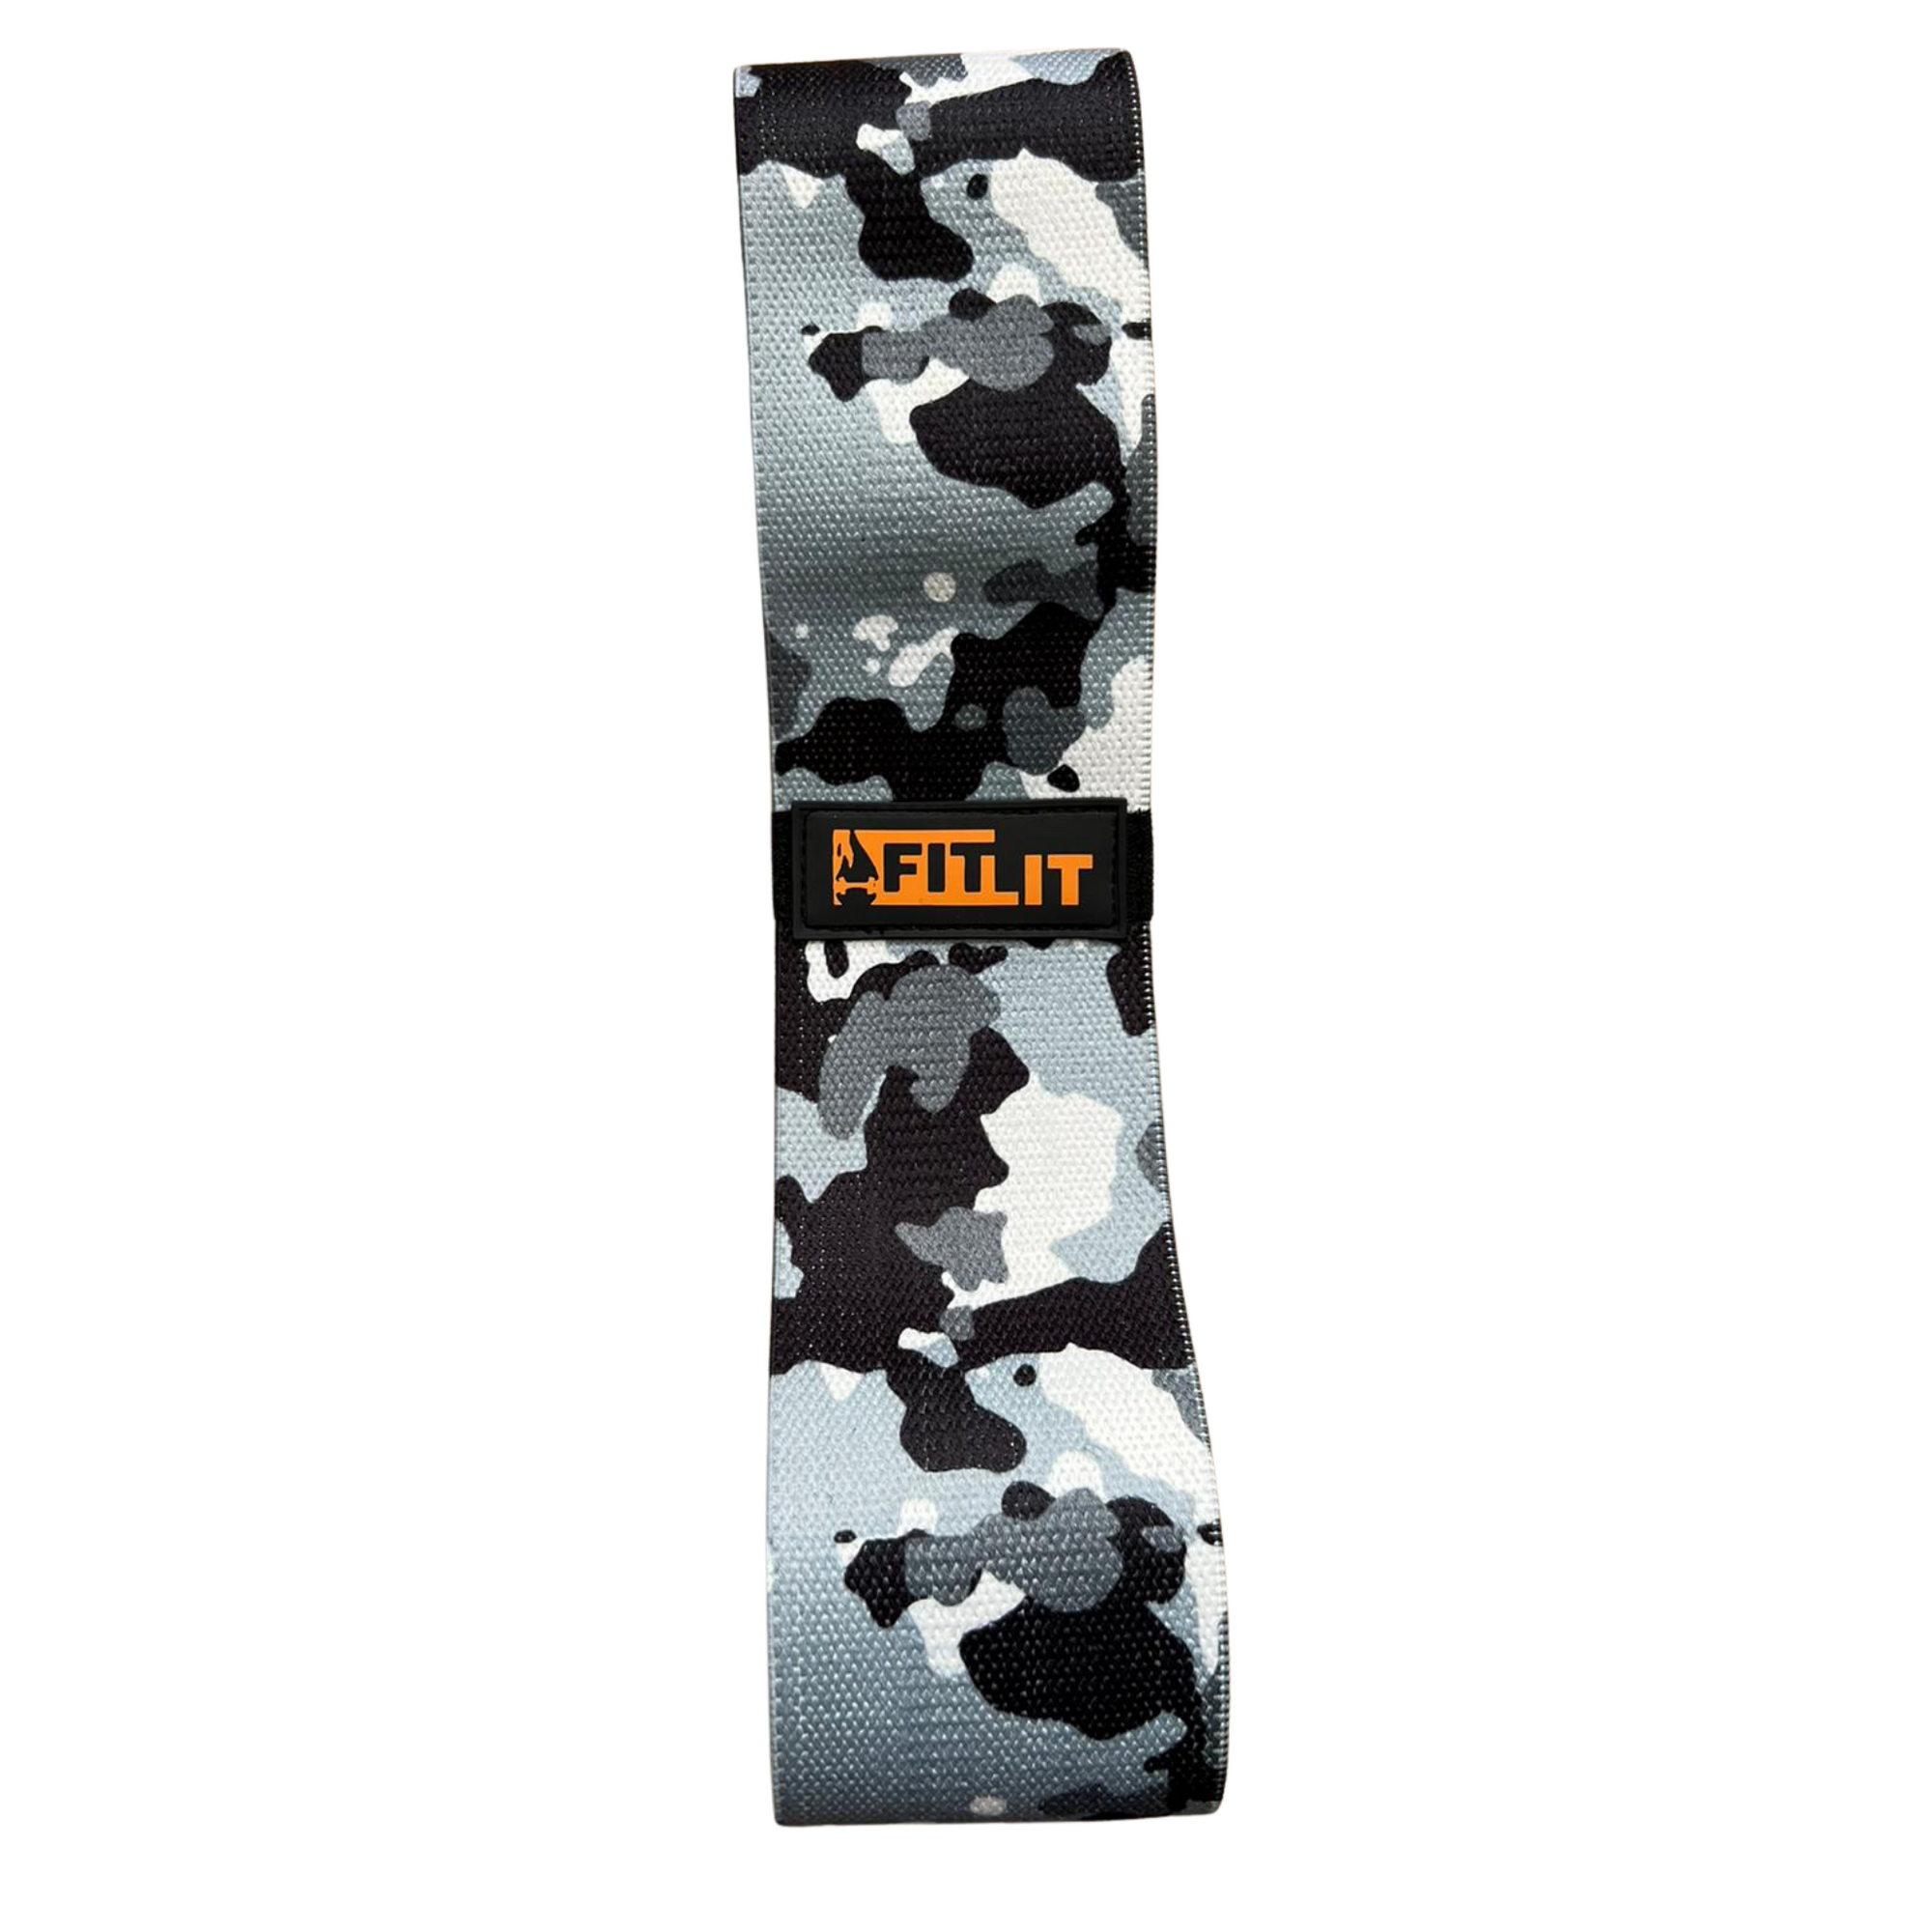 Camo Fabric Hip Fitness Resistance Glute Bands Heavy